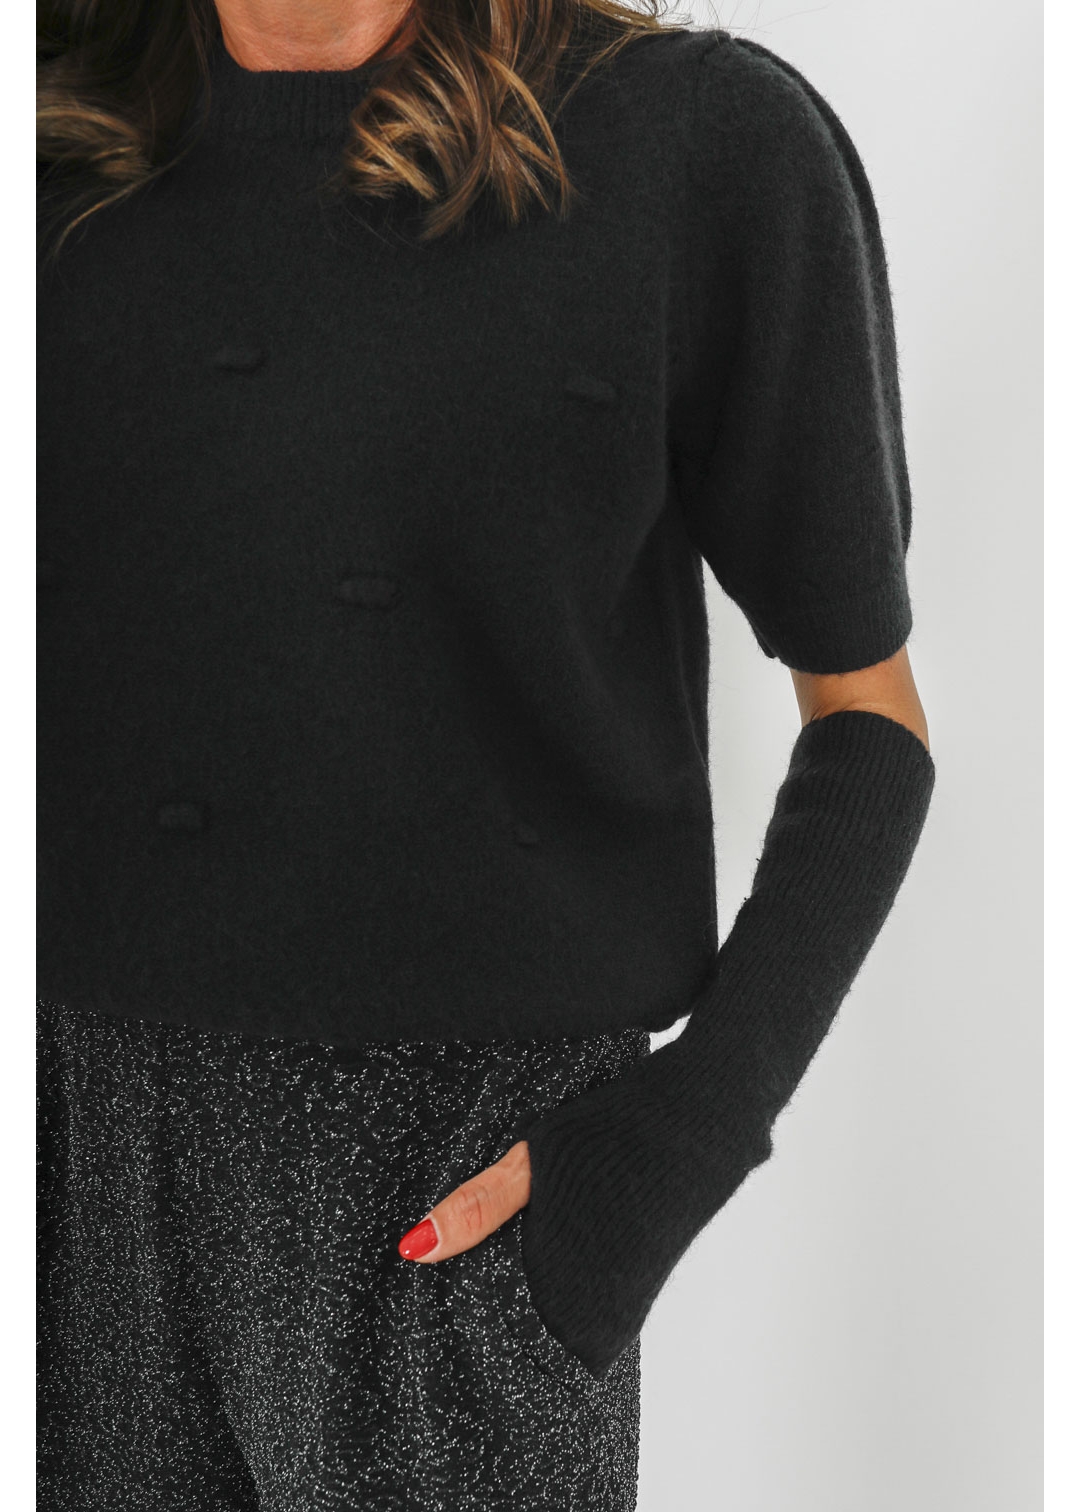 BLACK EMBOSSED SWEATER WITH MITTENS